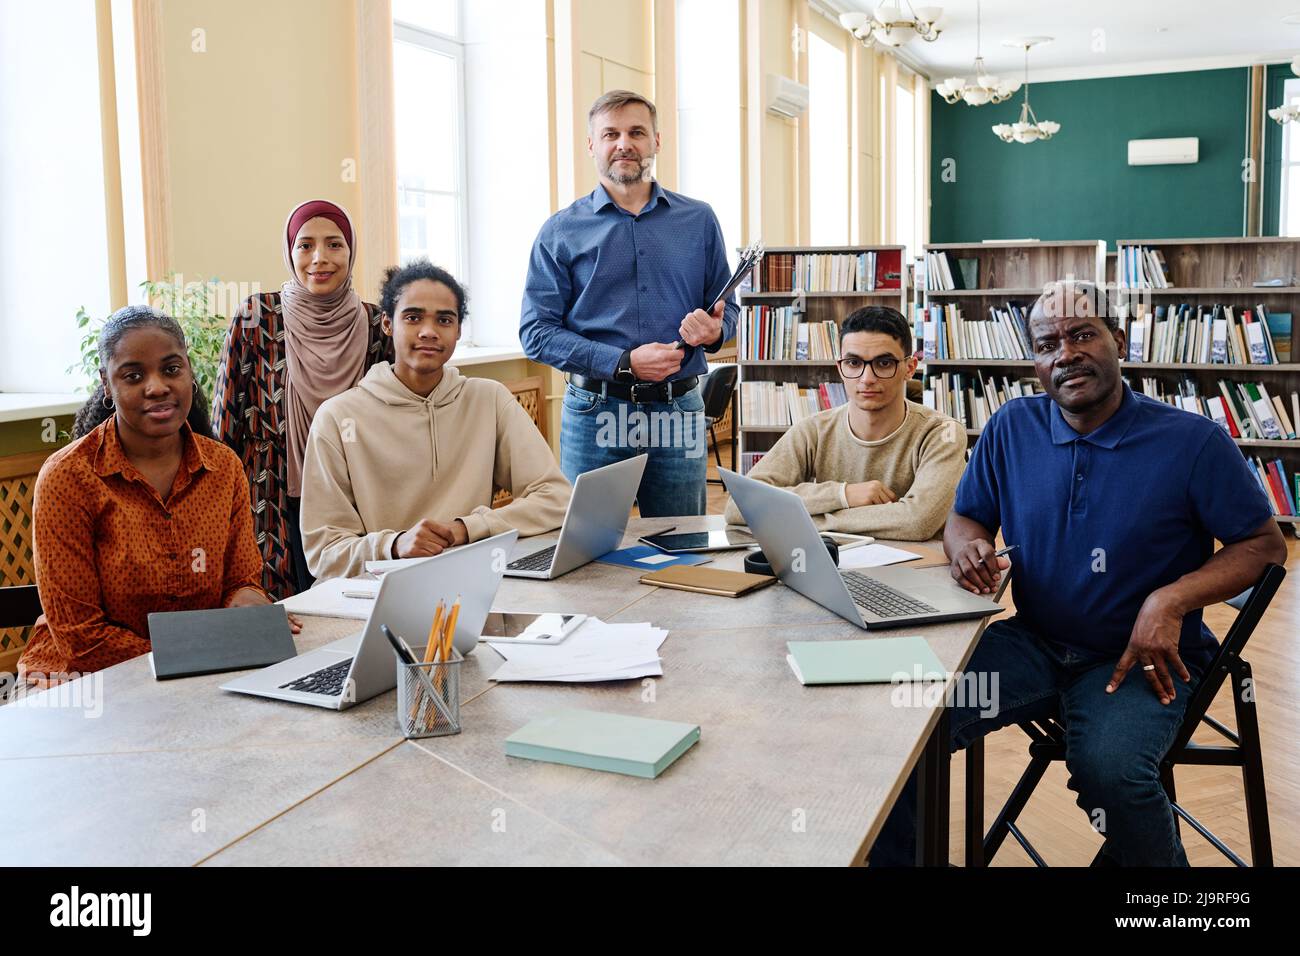 Group portrait of modern English language teacher and multi-ethnic immigrant students having class in library looking at camera Stock Photo